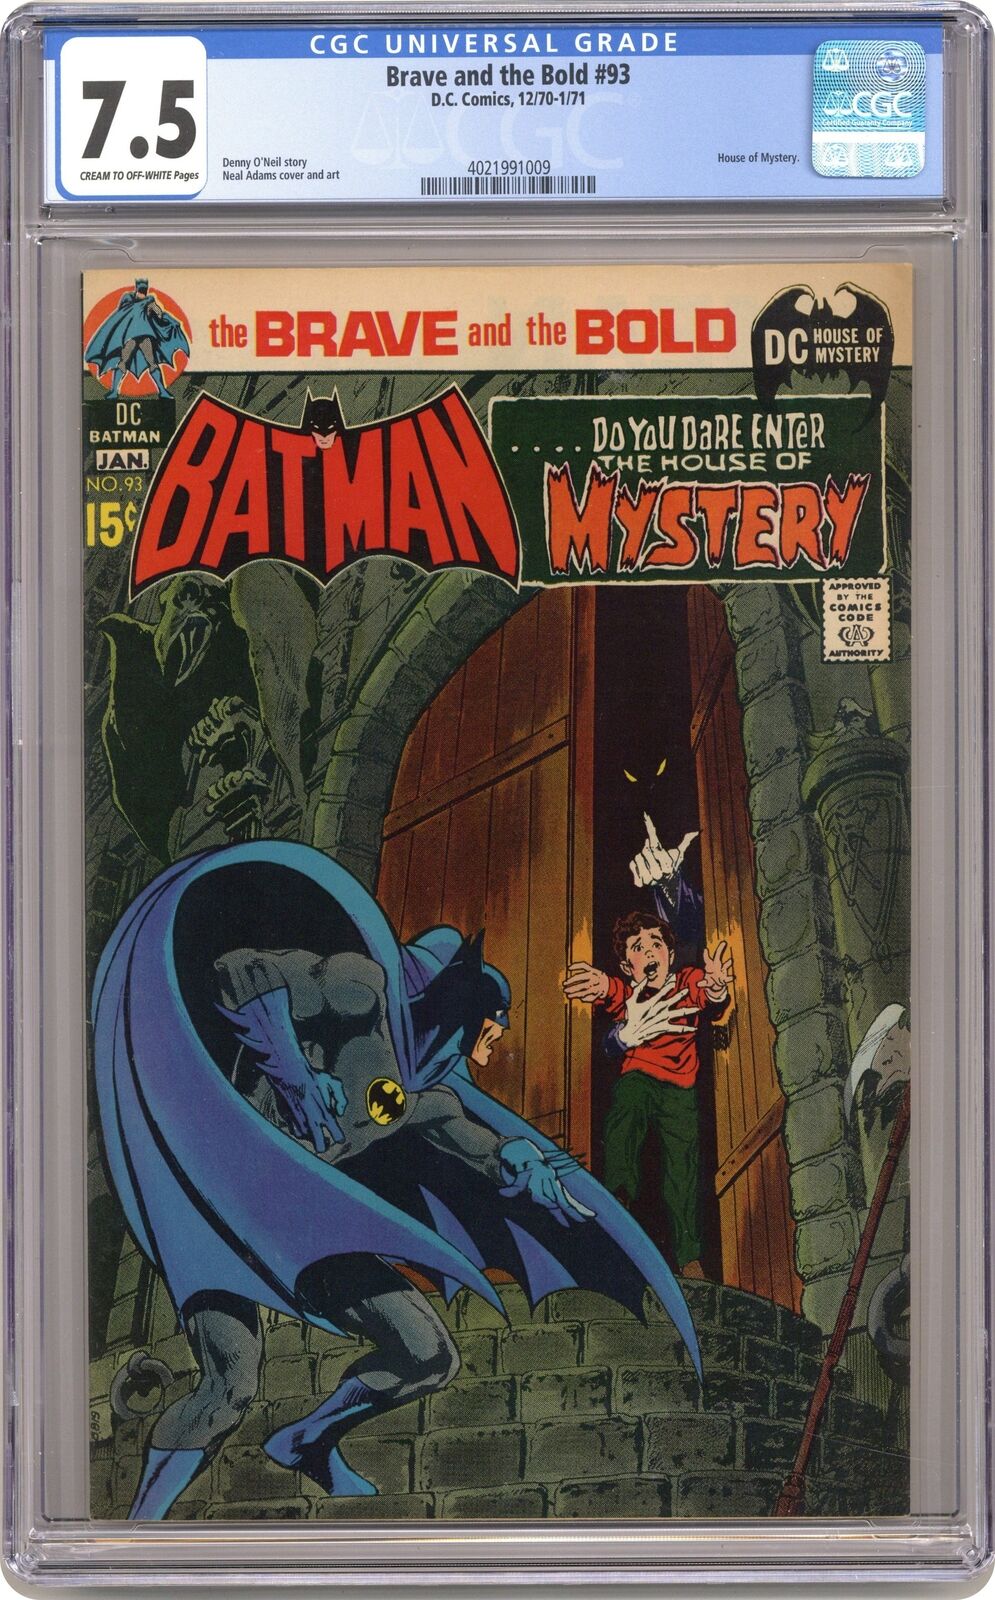 Brave and the Bold #93 CGC 7.5 1971 4021991009